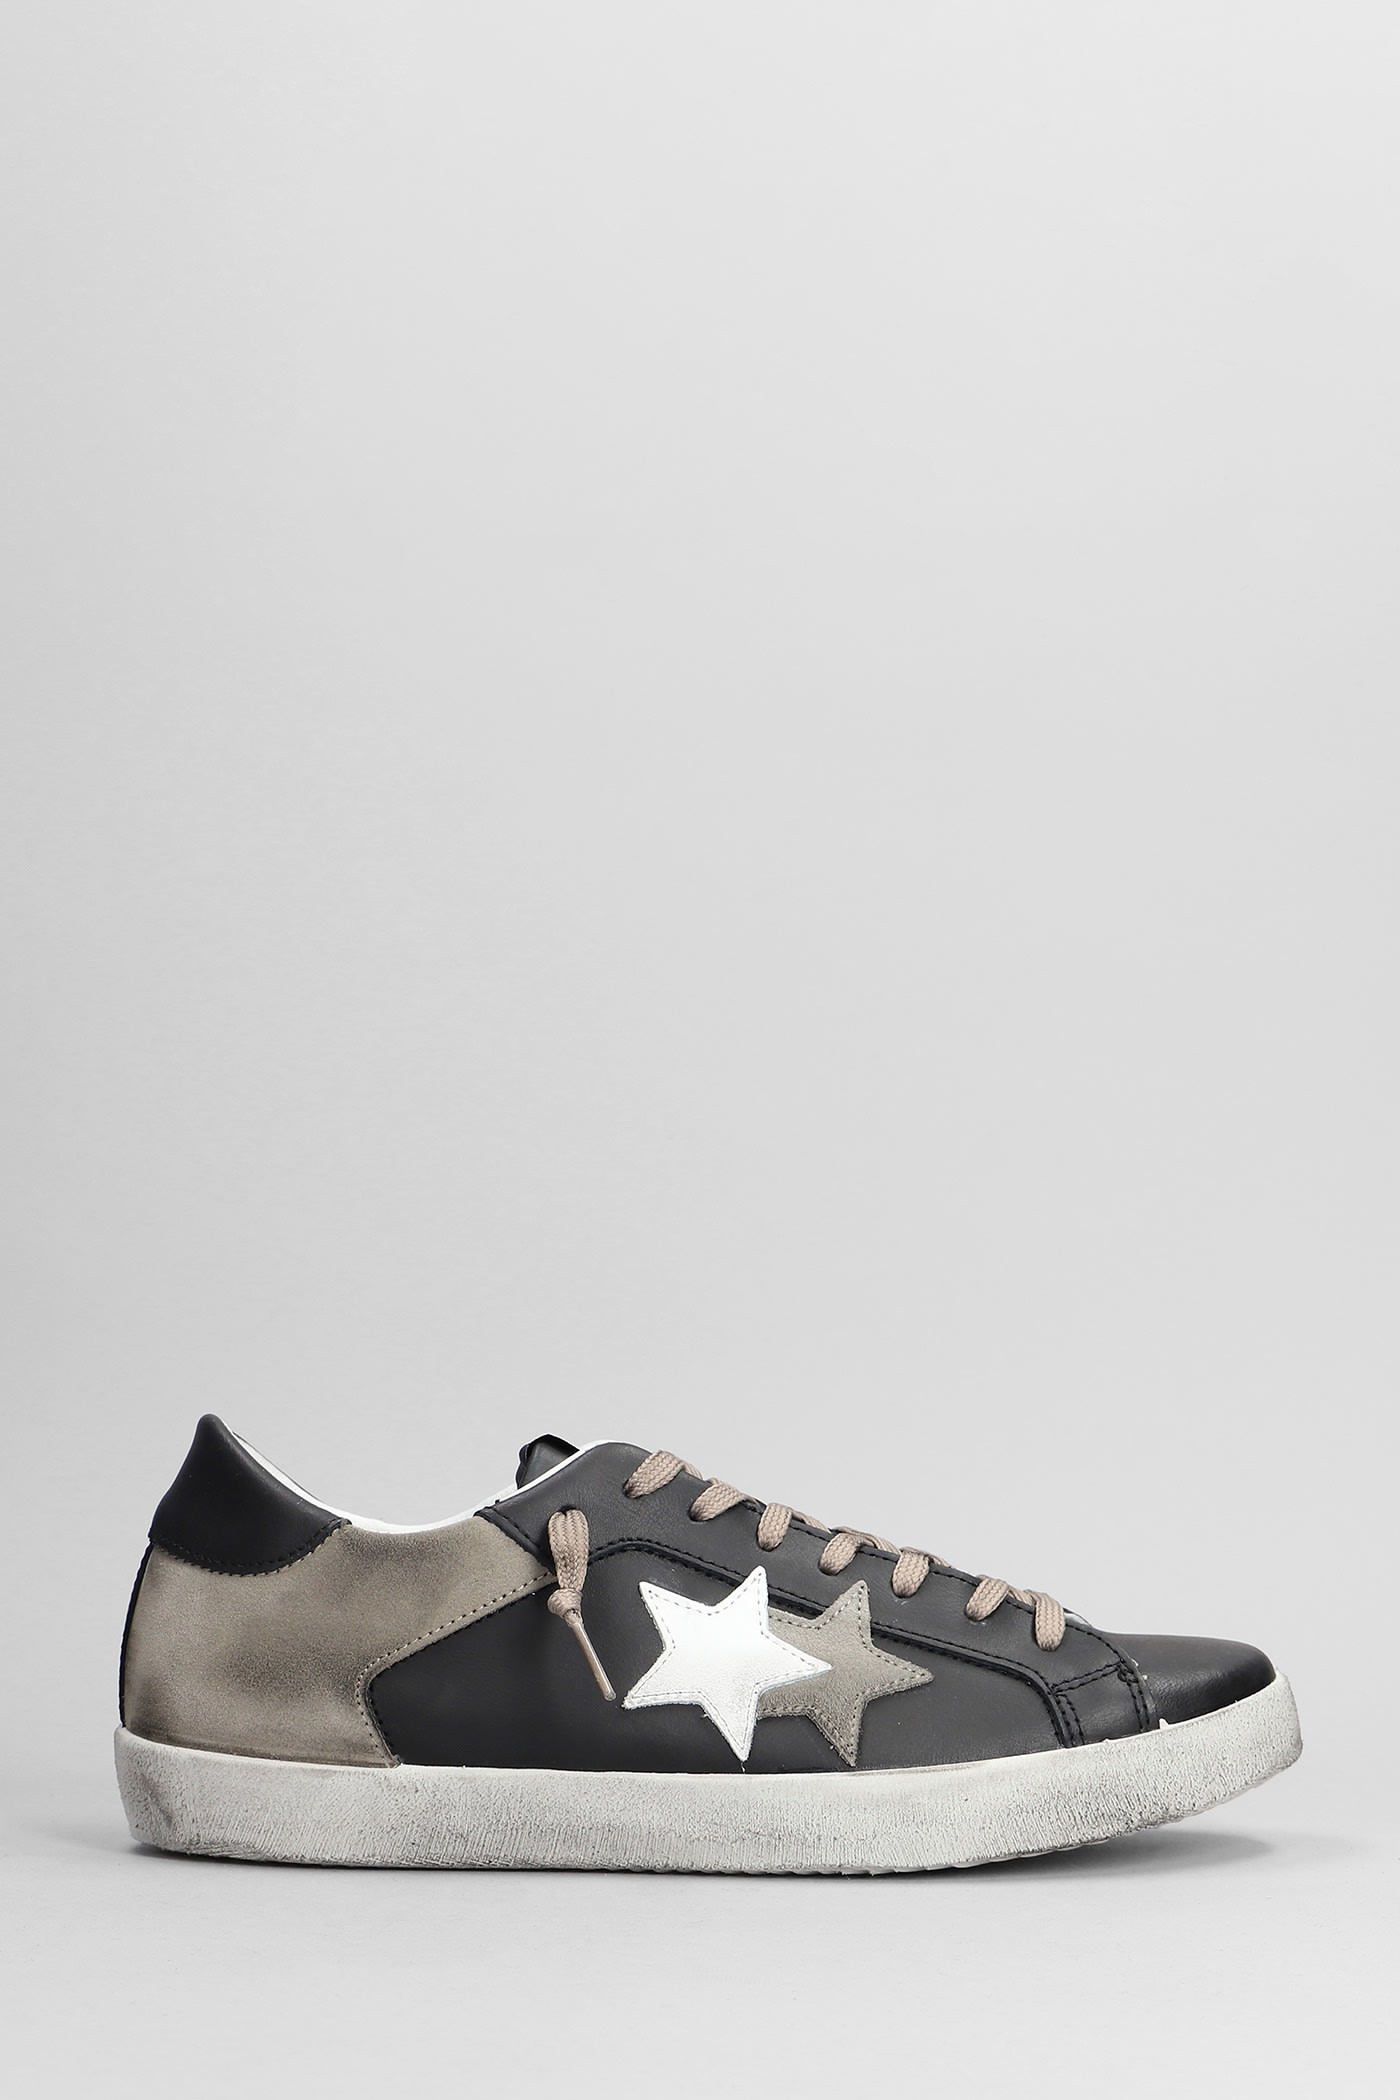 2star Trainers In Black Suede And Leather